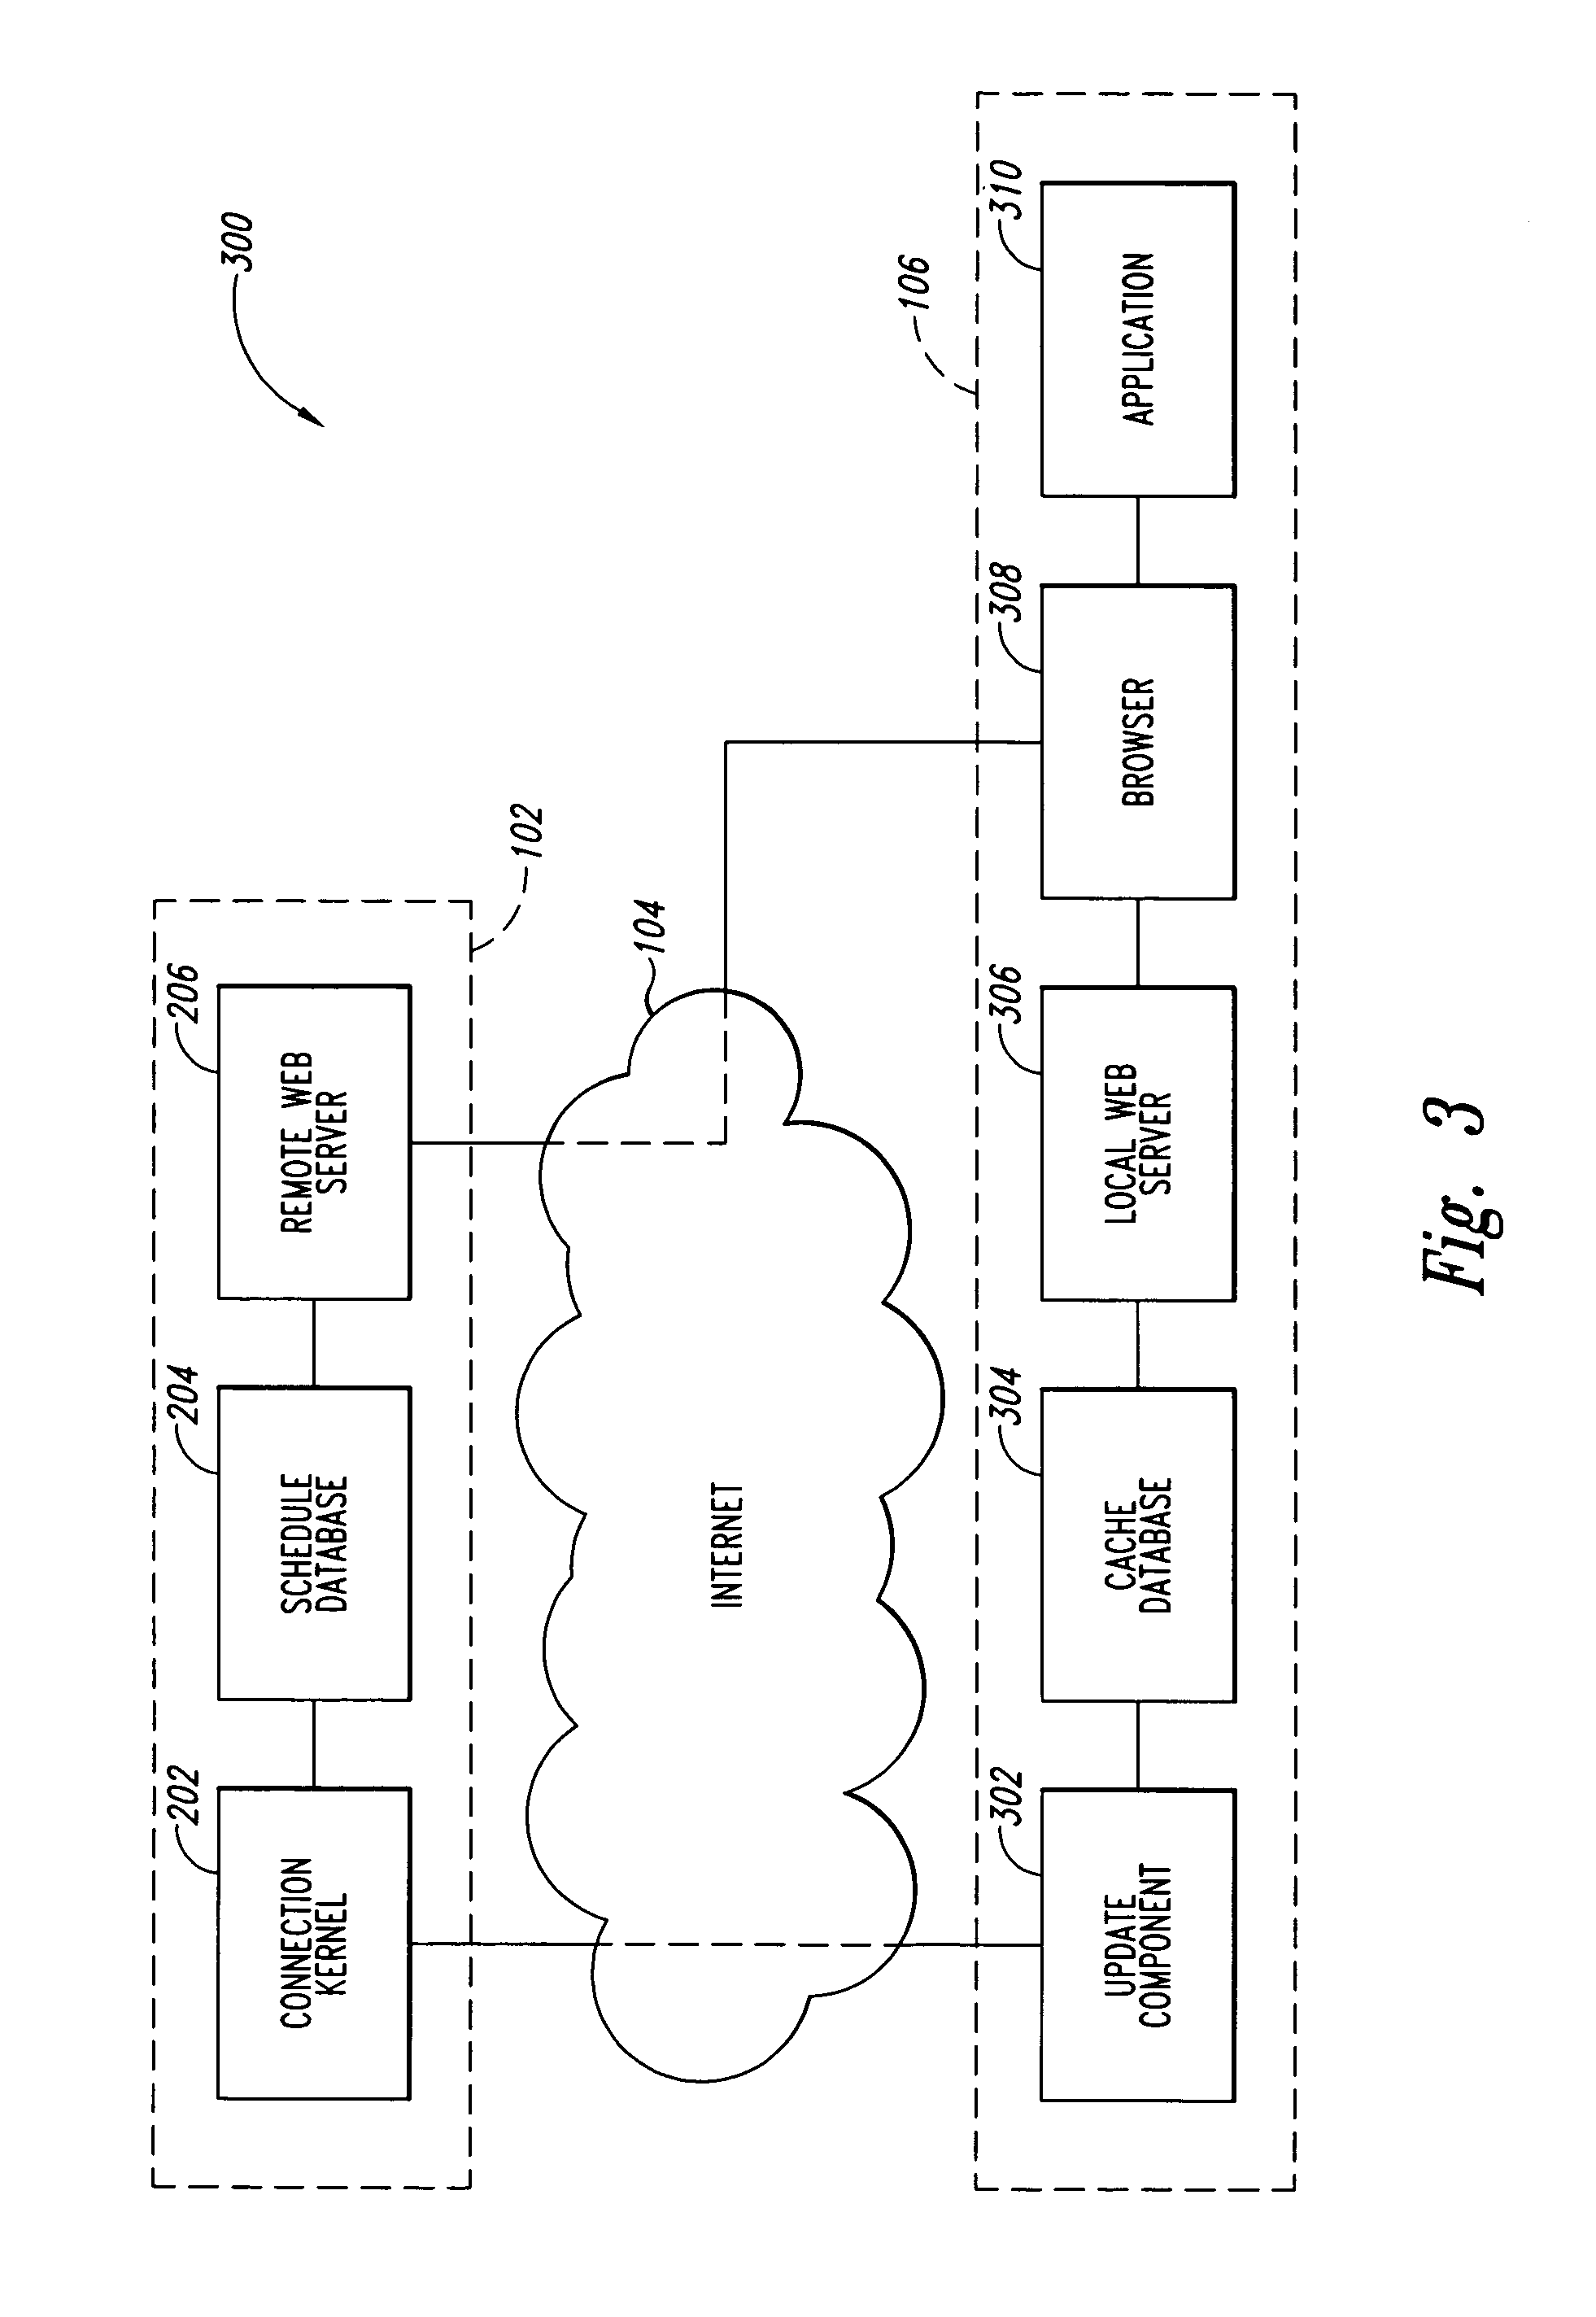 Systems and methods for enhancing connectivity between a mobile workforce and a remote scheduling application